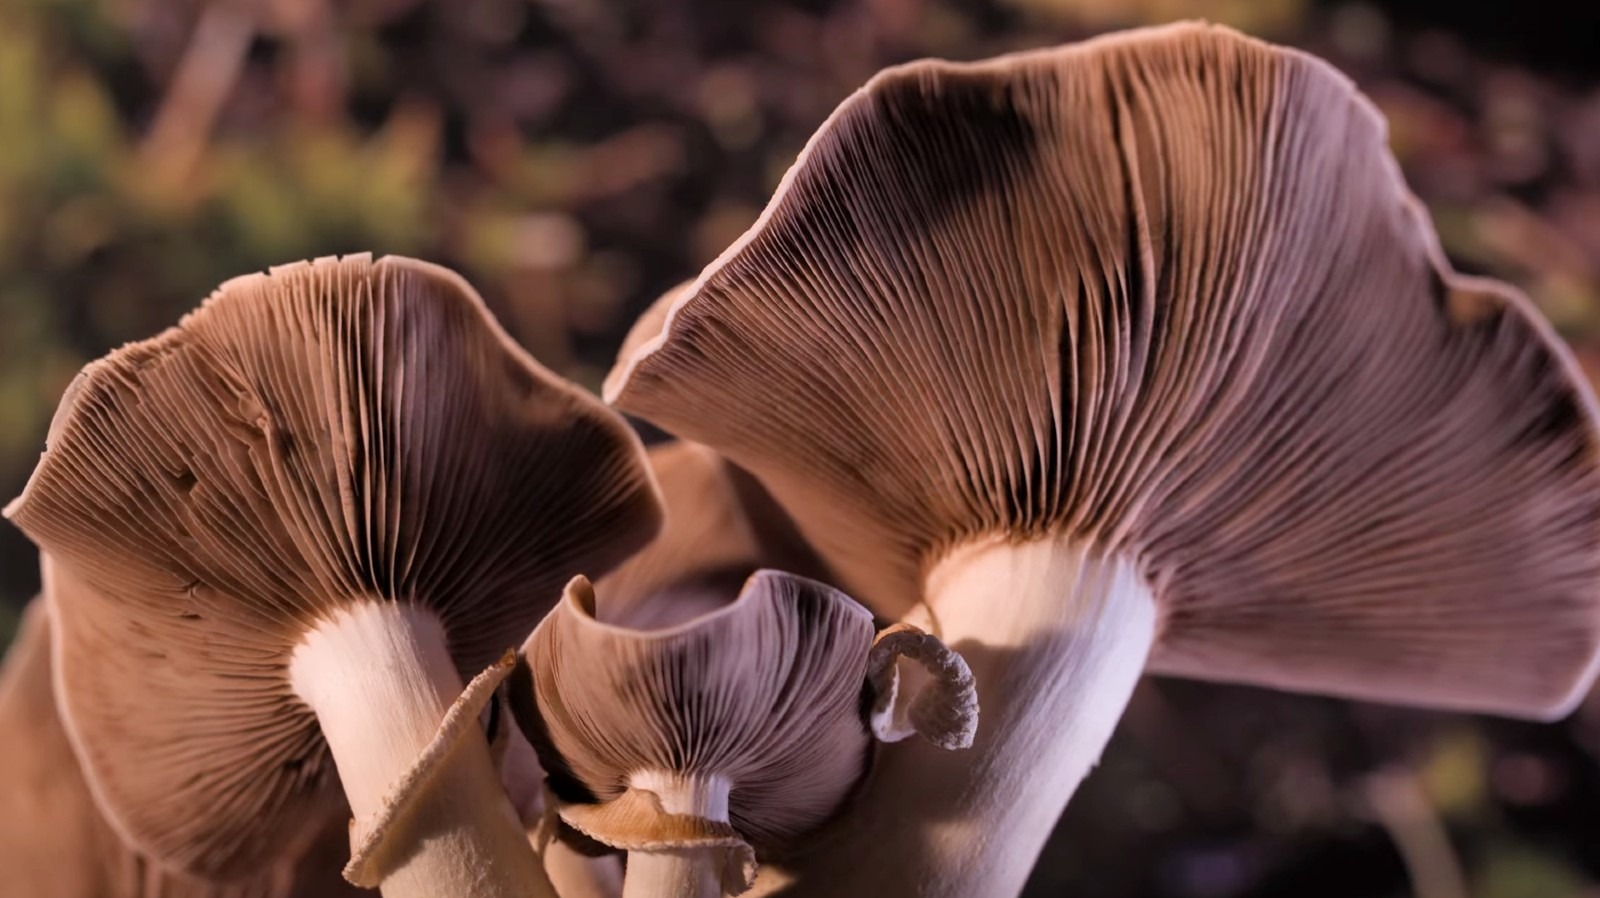 #Fantastic Fungi Is The Netflix Film That Says ‘Look Down’